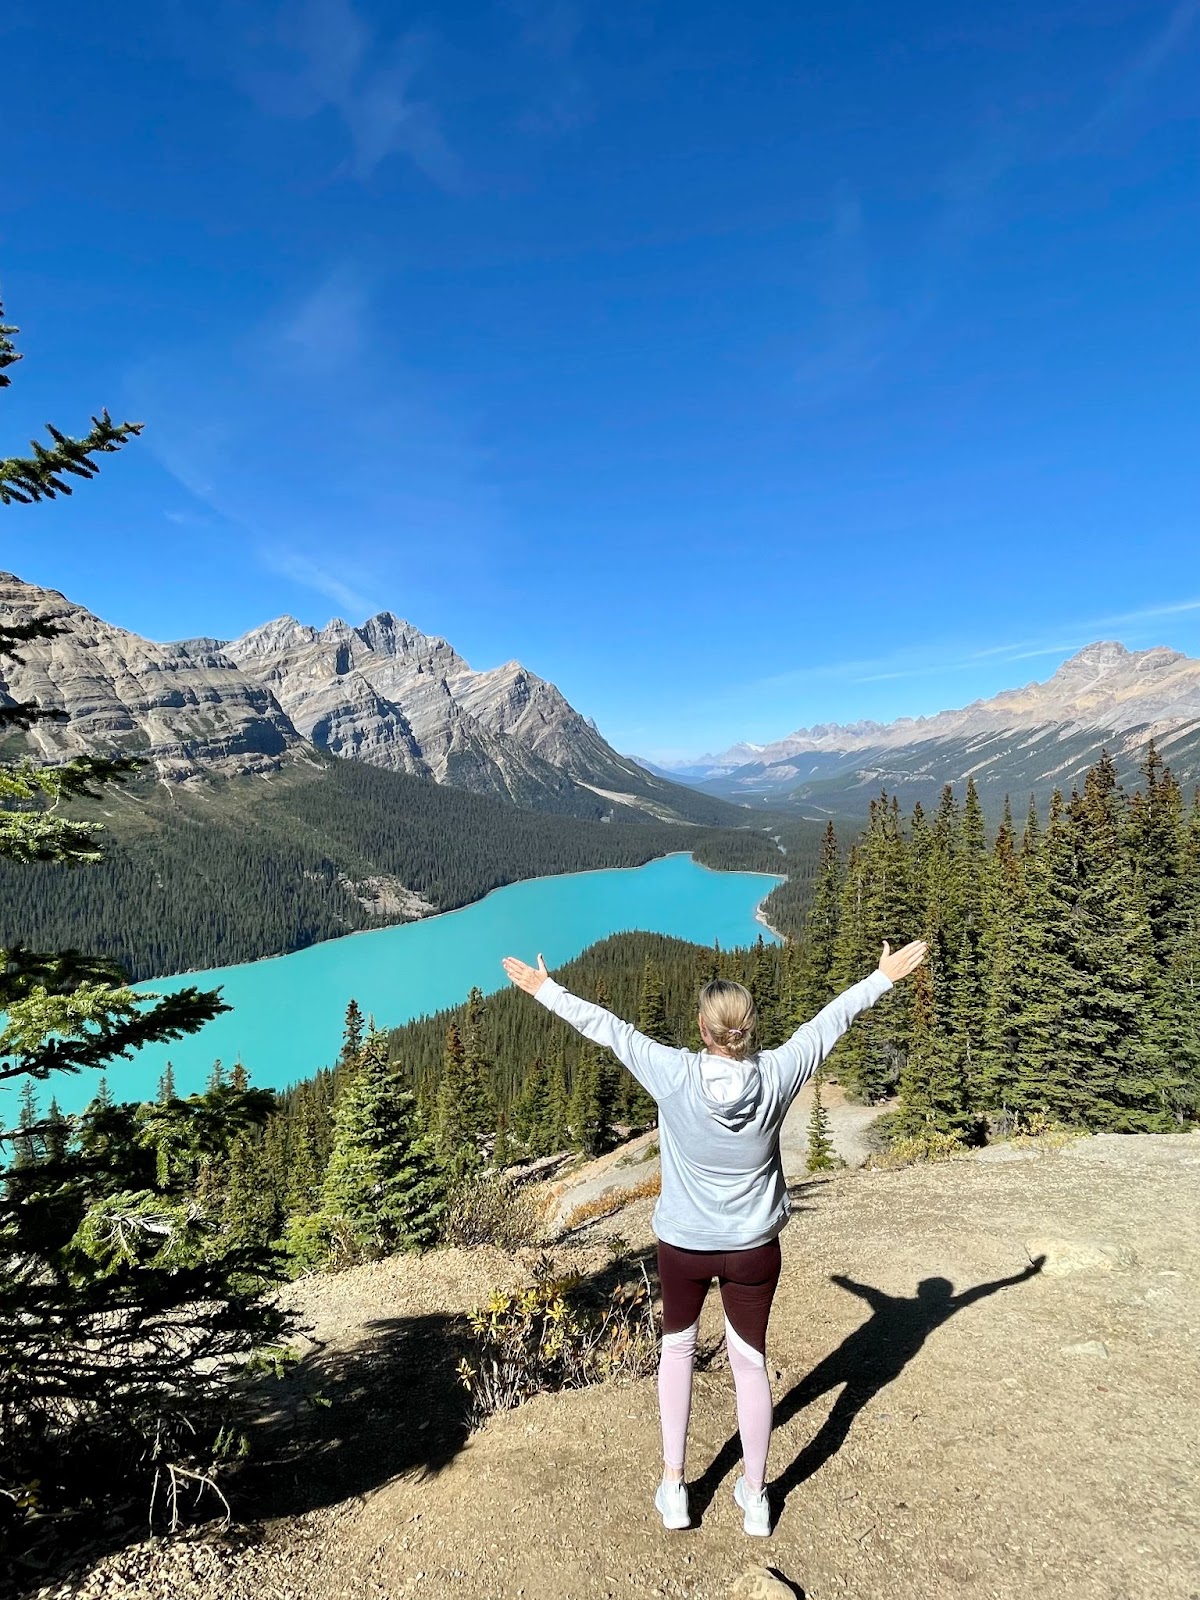 5 Days in Banff and Jasper National Parks: Peyto Lake